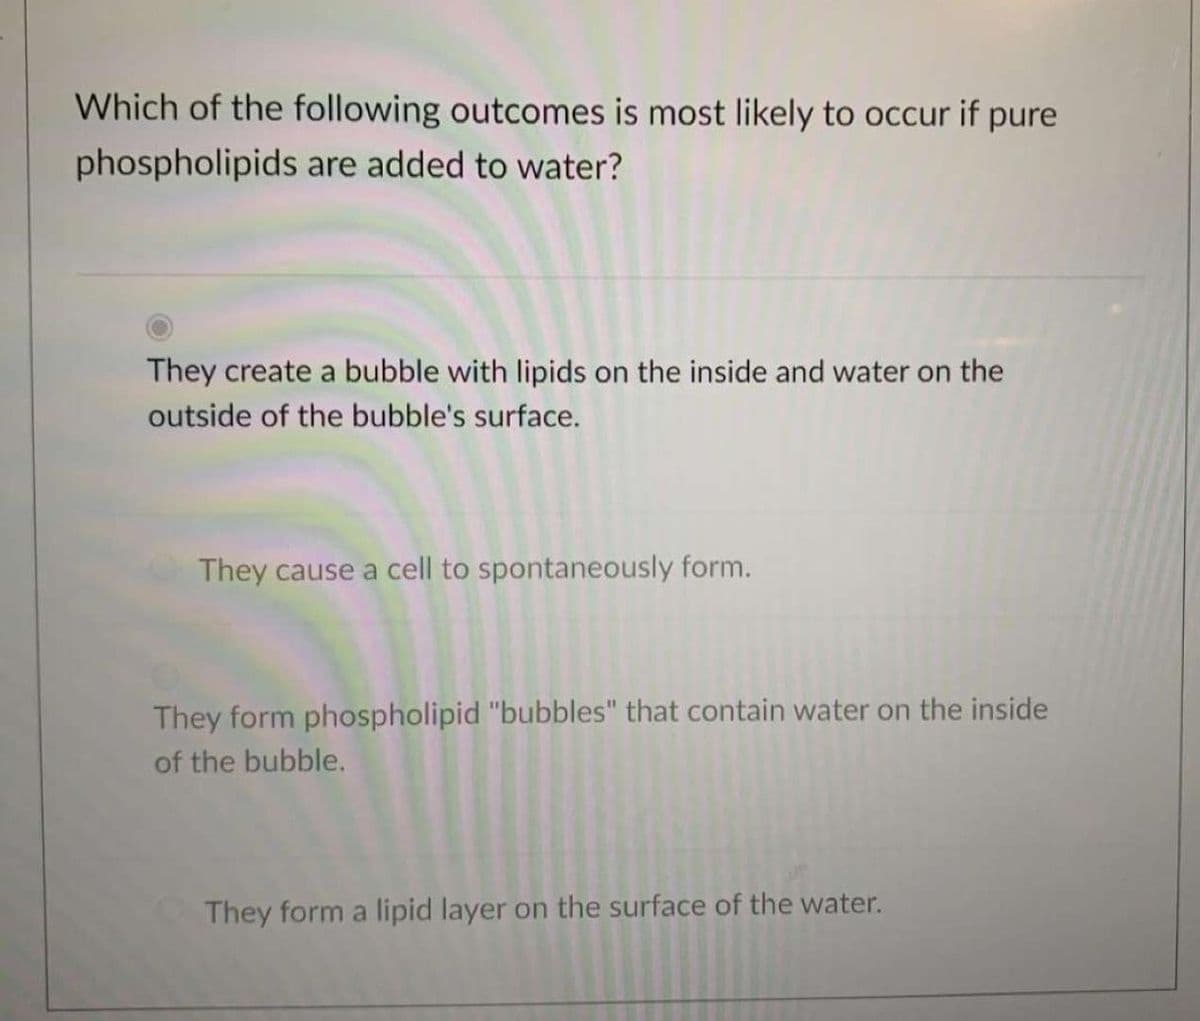 Which of the following outcomes is most likely to occur if pure
phospholipids are added to water?
They create a bubble with lipids on the inside and water on the
outside of the bubble's surface.
They cause a cell to spontaneously form.
They form phospholipid "bubbles" that contain water on the inside
of the bubble.
They form a lipid layer on the surface of the water.
